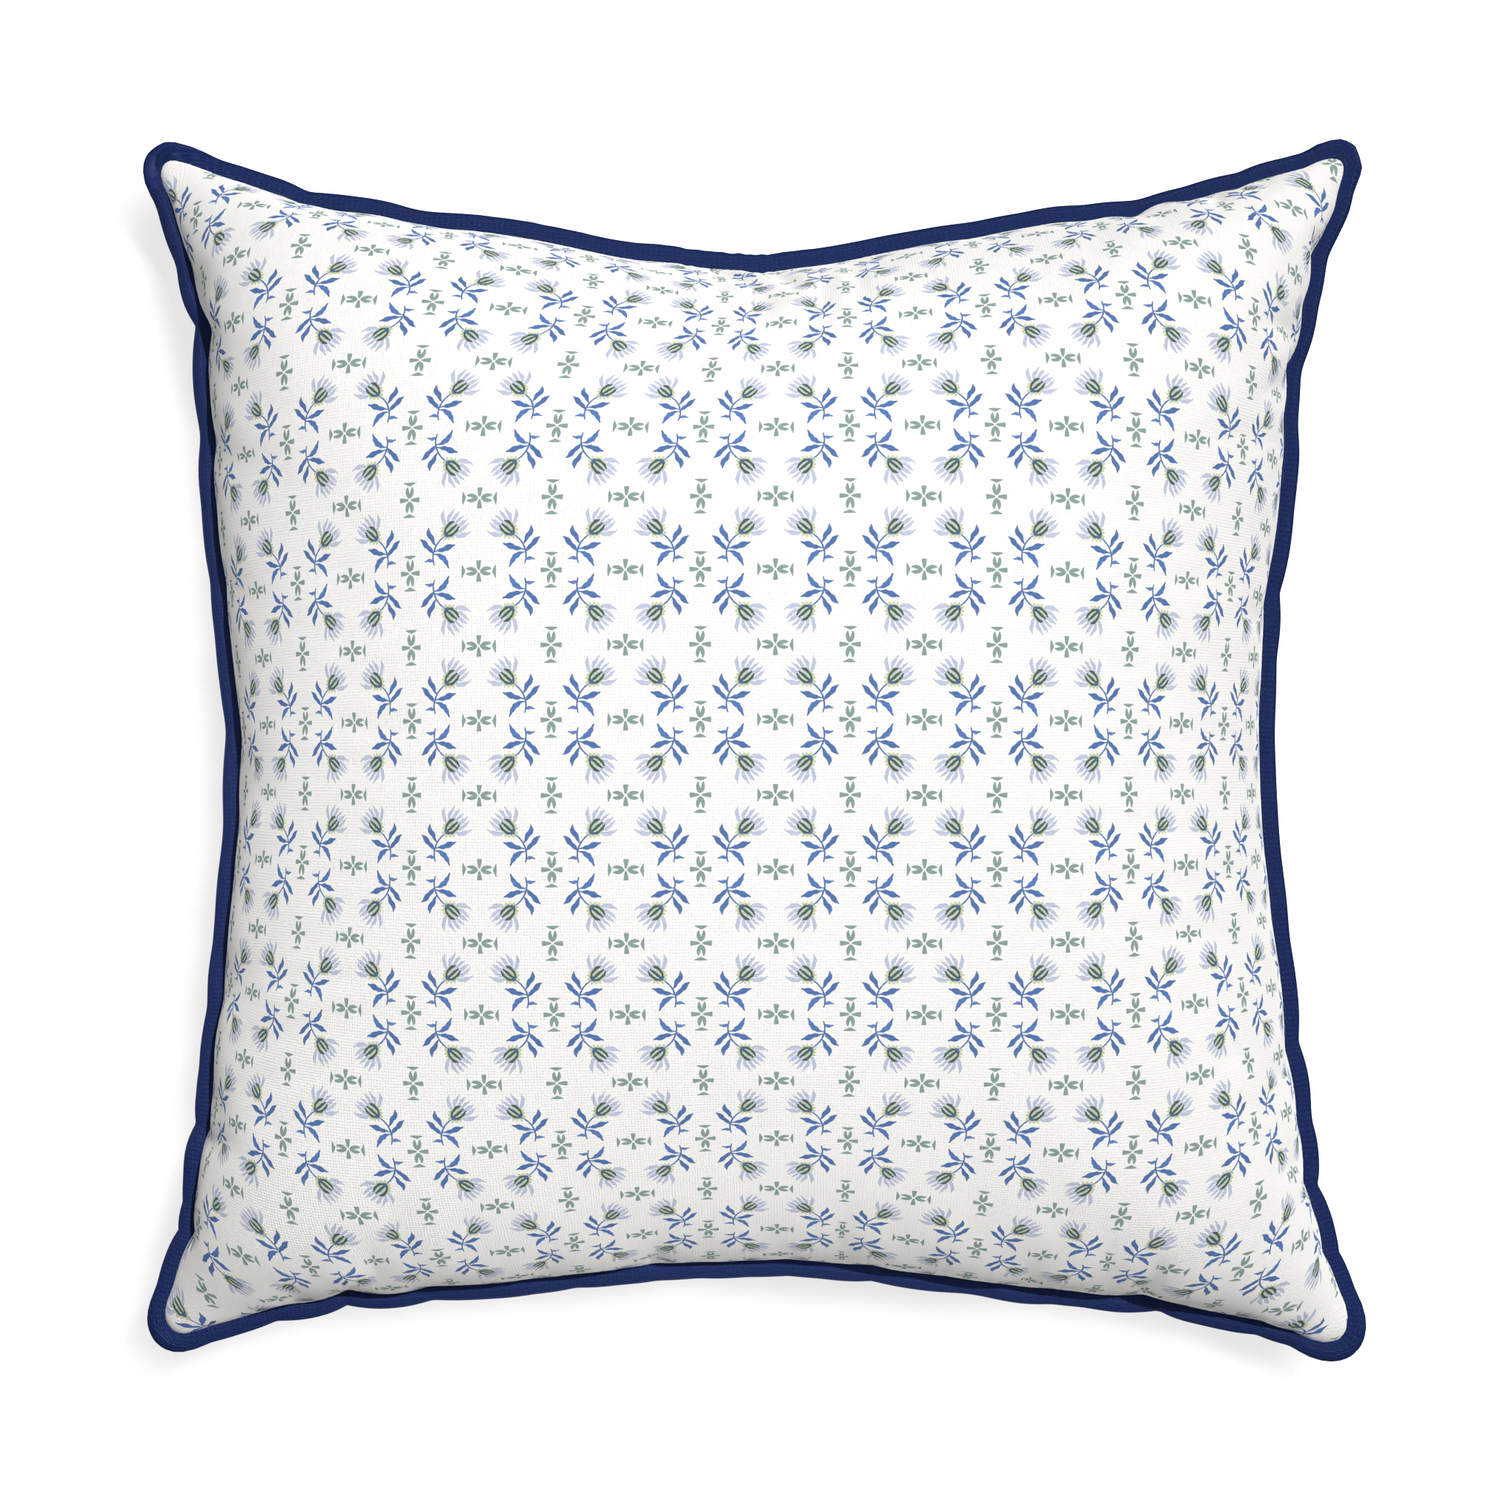 Euro-sham lee custom blue & green floralpillow with midnight piping on white background